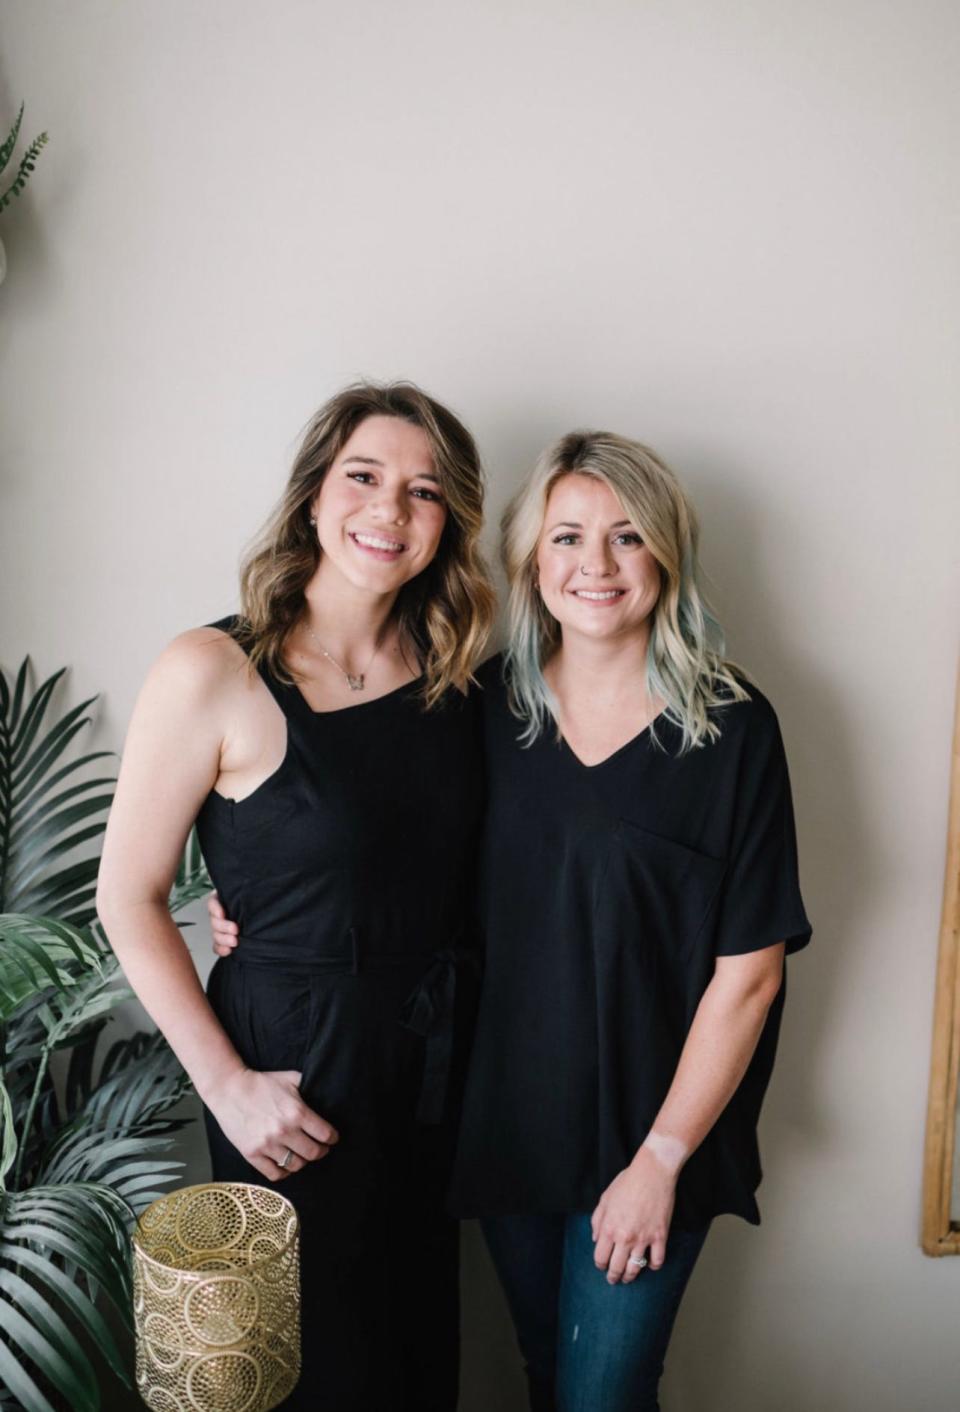 While they like to have fun, Brianna Weiss (left) and Taylor Canup were ready to take the leap as business owners.